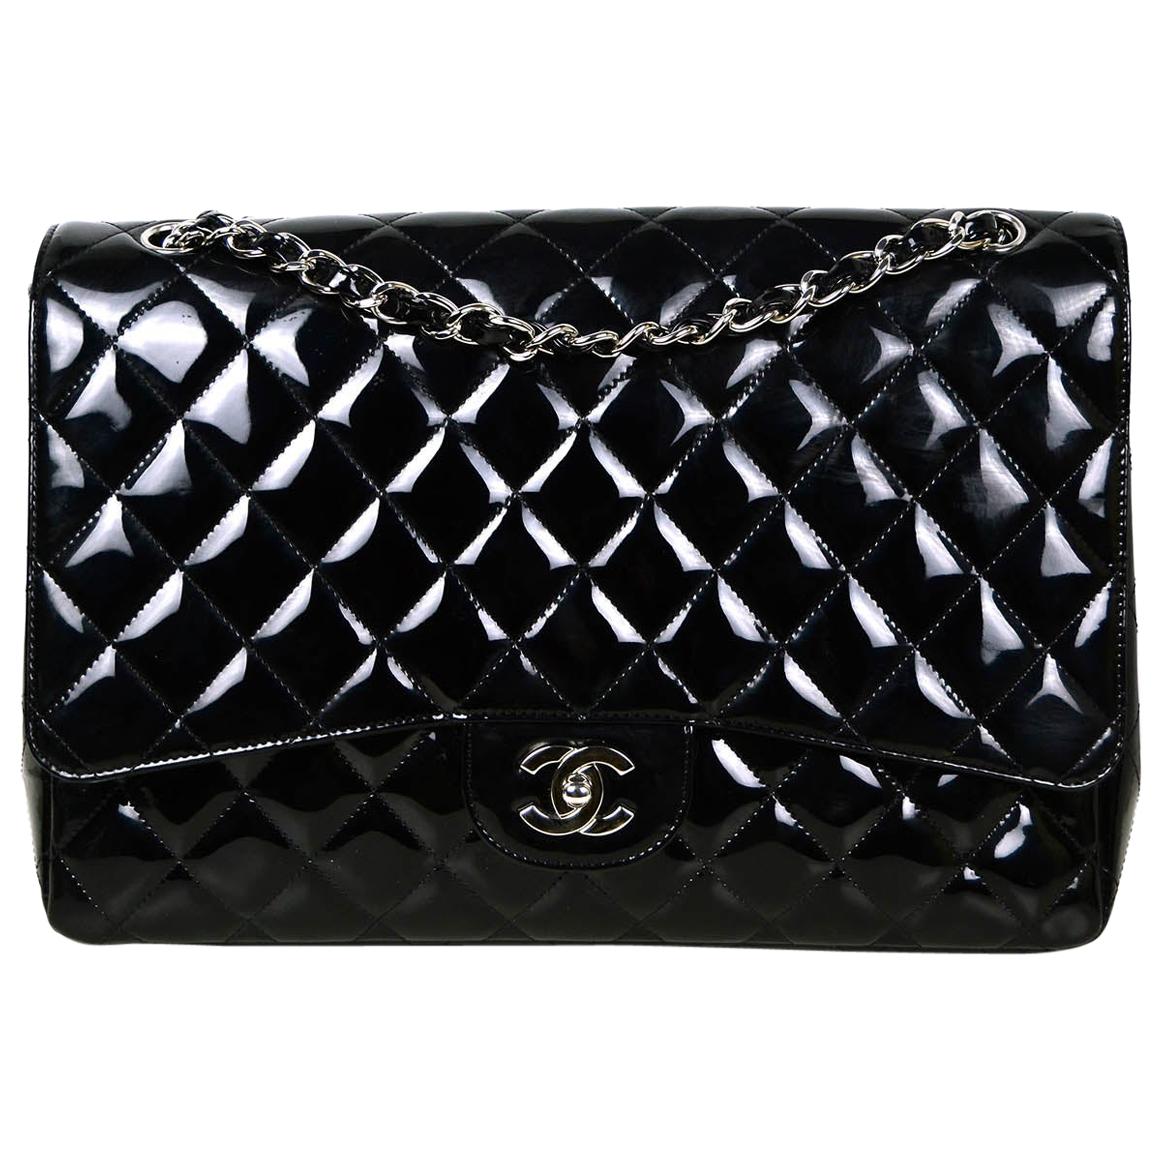 Chanel Black Patent Leather Quilted Single Flap Maxi Classic Bag